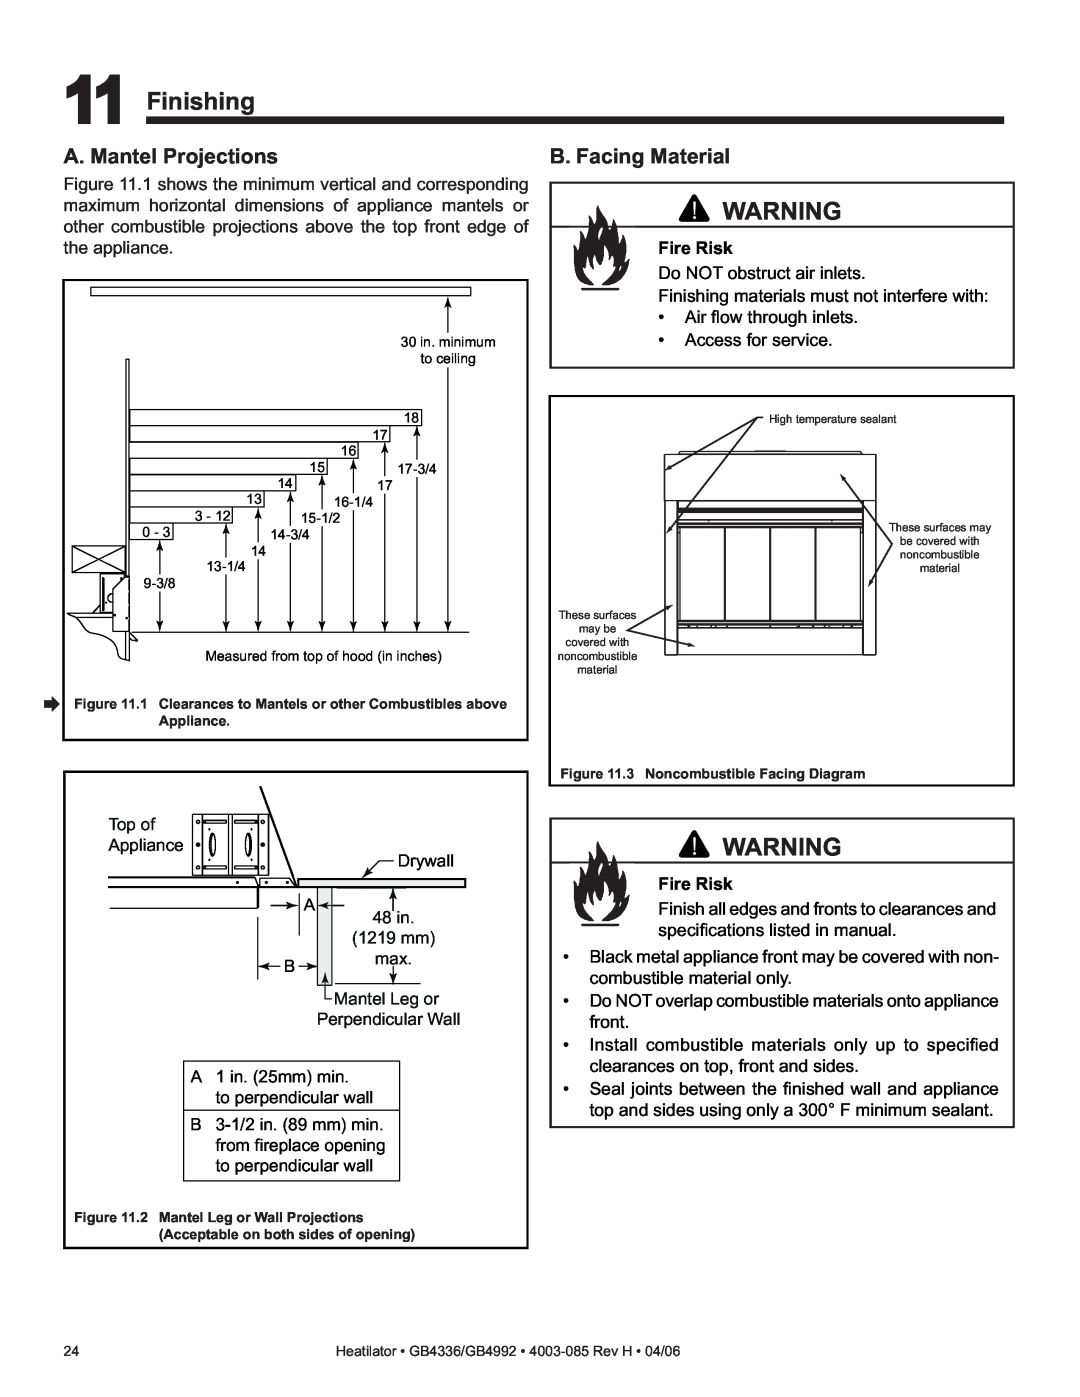 Heatiator GB4336 owner manual Finishing, A. Mantel Projections, B. Facing Material, Fire Risk 